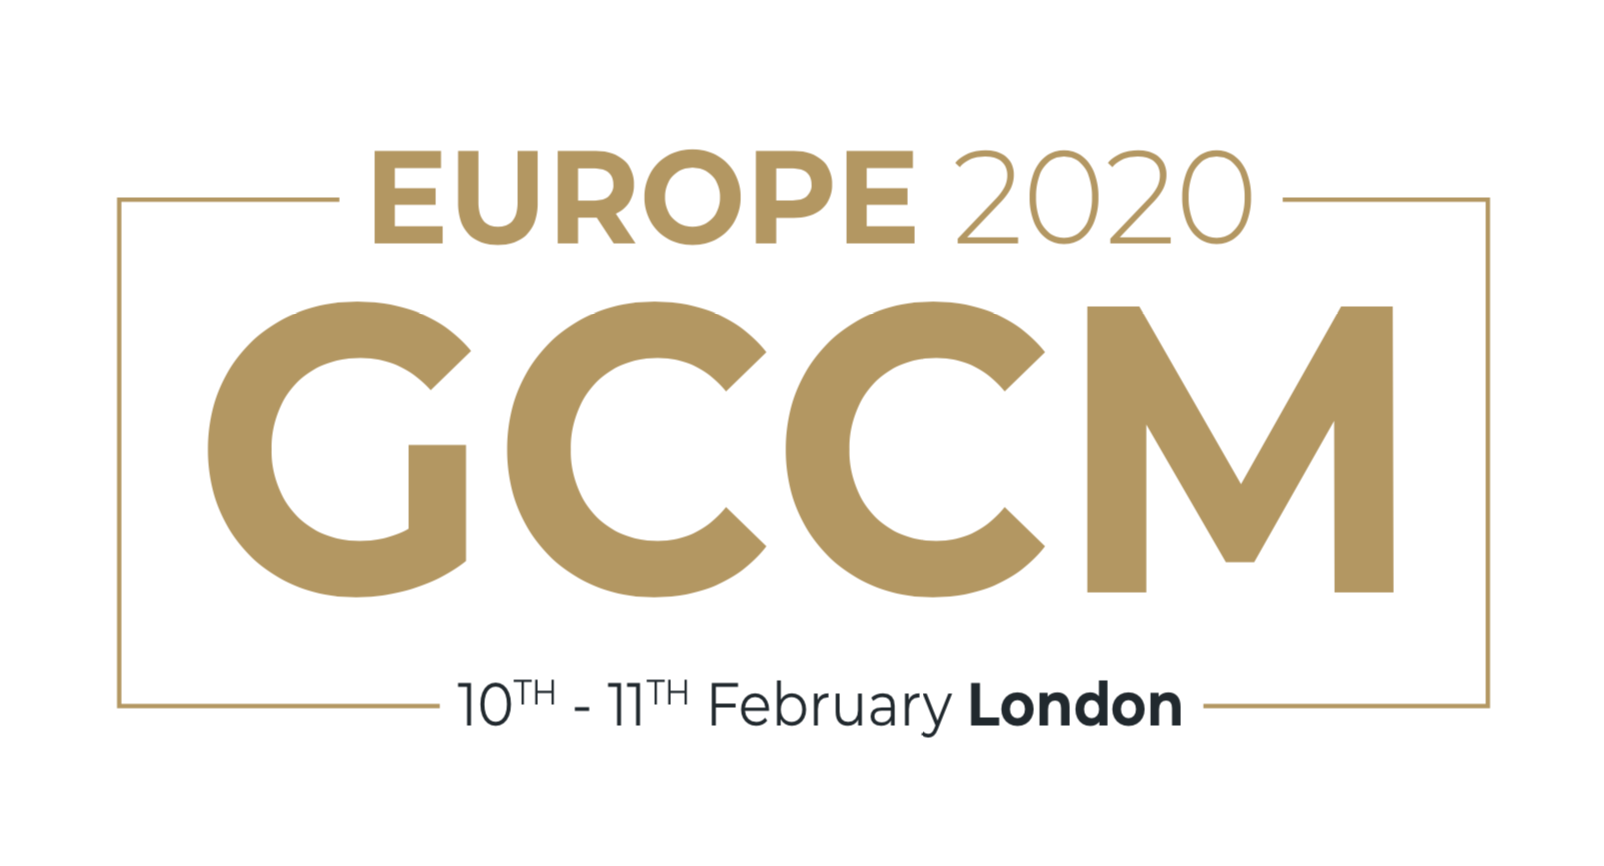 Meet the DIDWW team at the Europe 2020 GCCM event